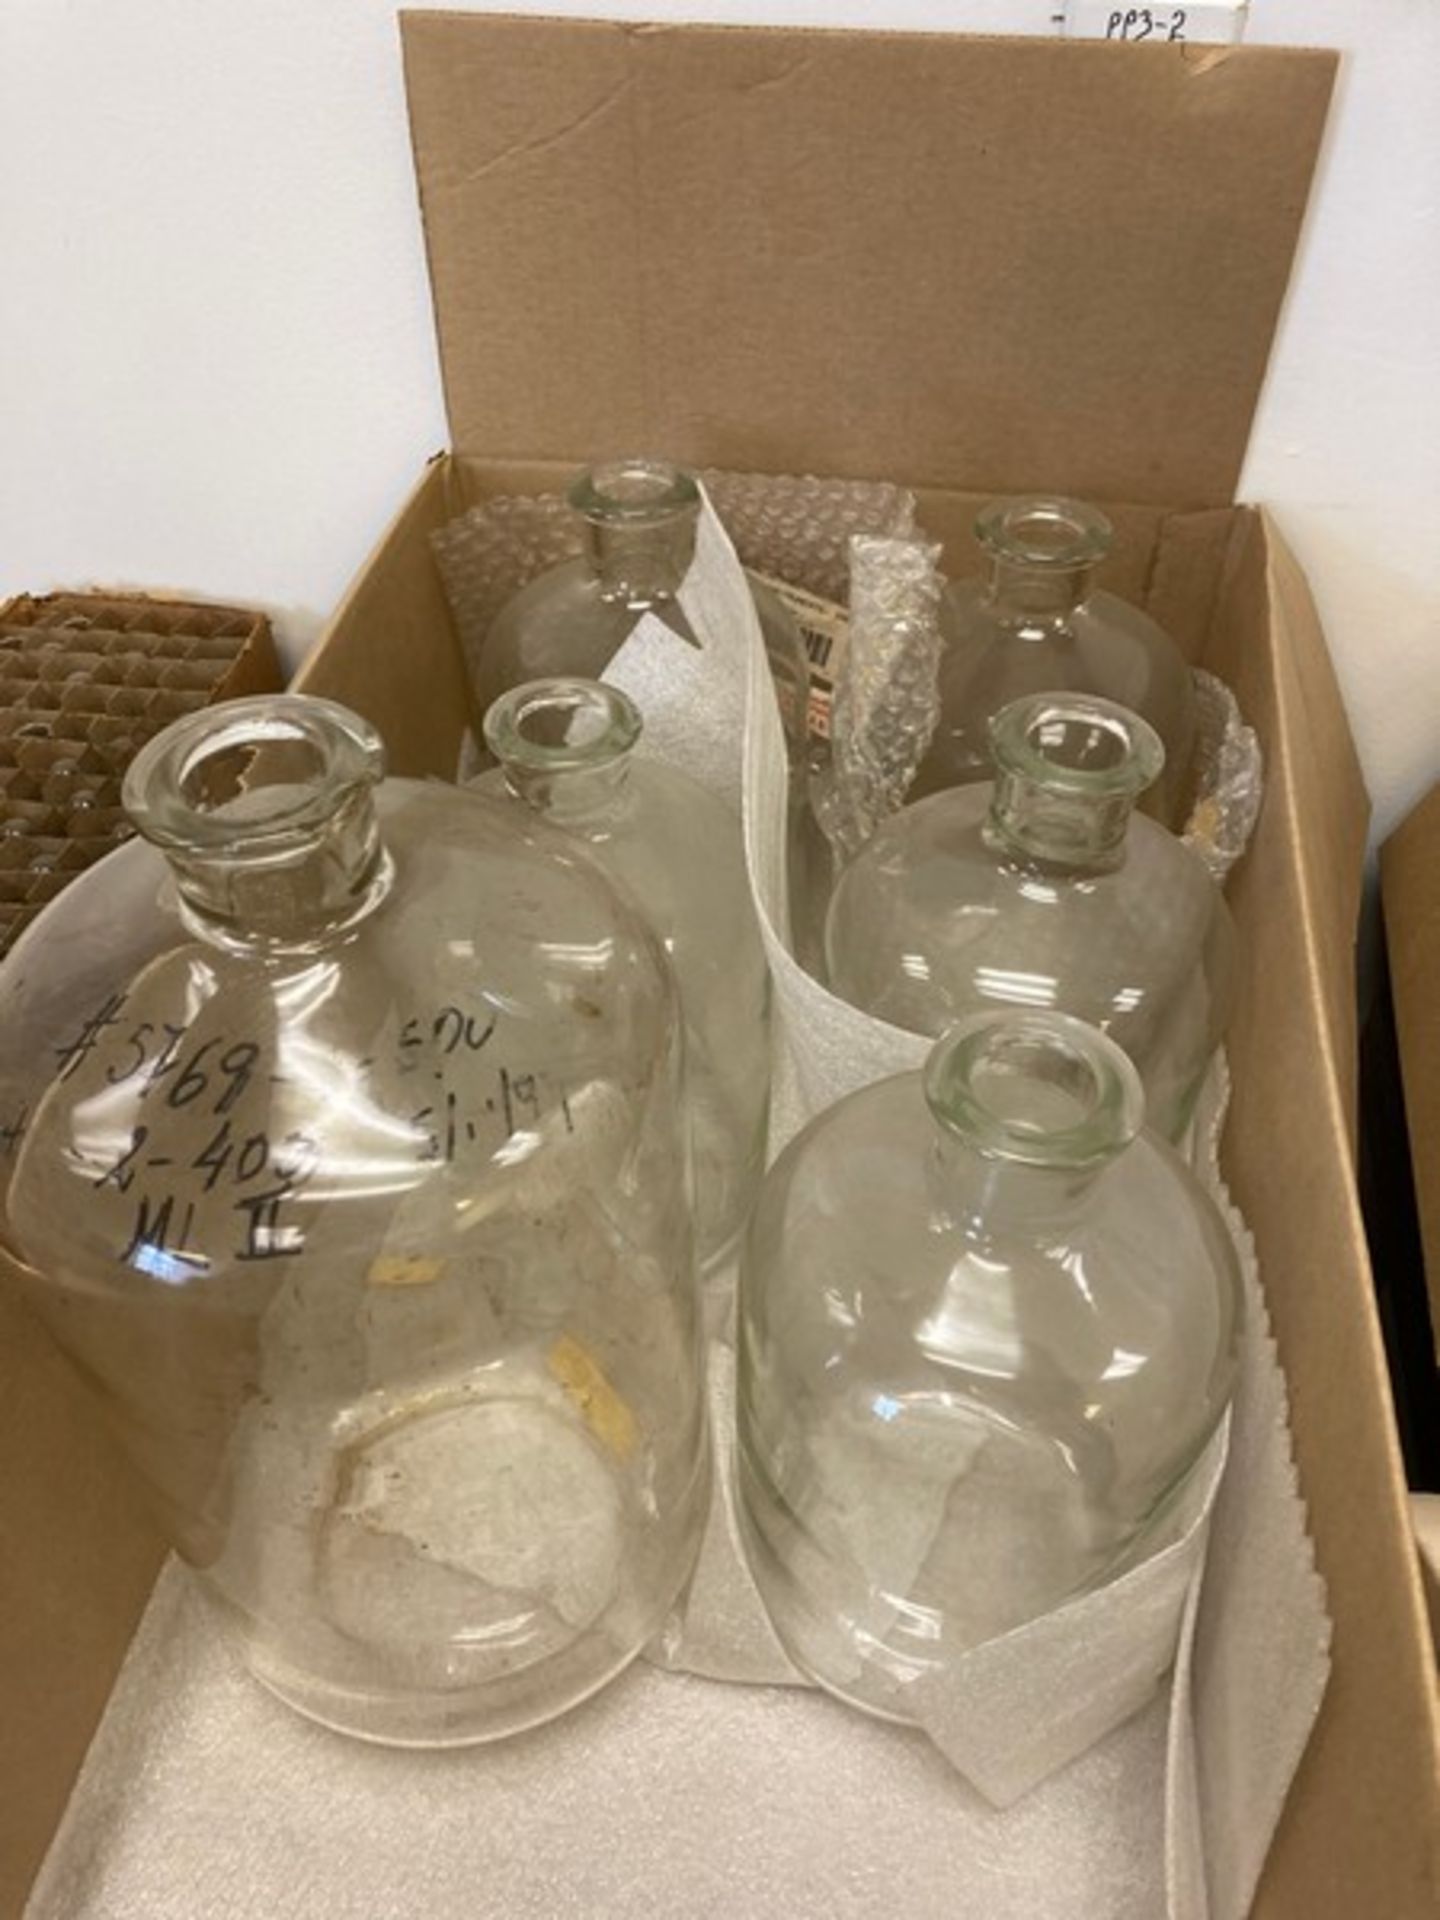 approx 20 boxes Lab accessories & Glassware (on 3 tables & floor) - small carboys, flat glass domes, - Image 9 of 20